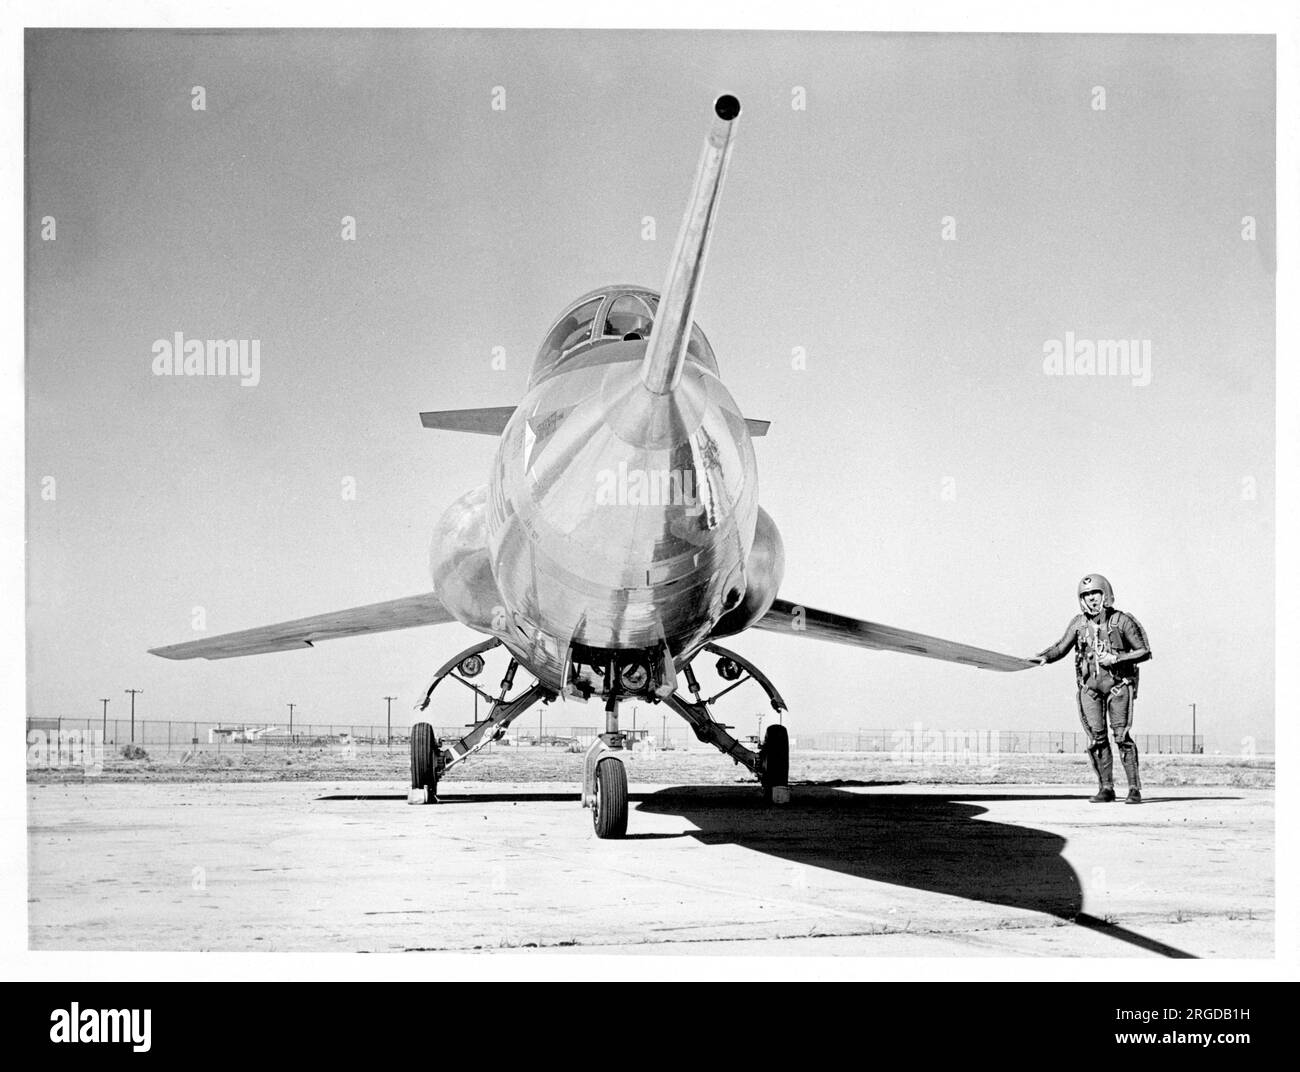 United States Air Force - Lockheed YF-104A Starfighter 55-2956 (MSN 183-1002), the number 2 YF-104 seen with a pilot in partial pressure suitat its unveiling at Palmdale, CA., on 17 April 1956. (The fairings over the intakes and shock cones were fitted to prevent interested parties, (Soviet Union), determining the performance from intake geometry). Stock Photo